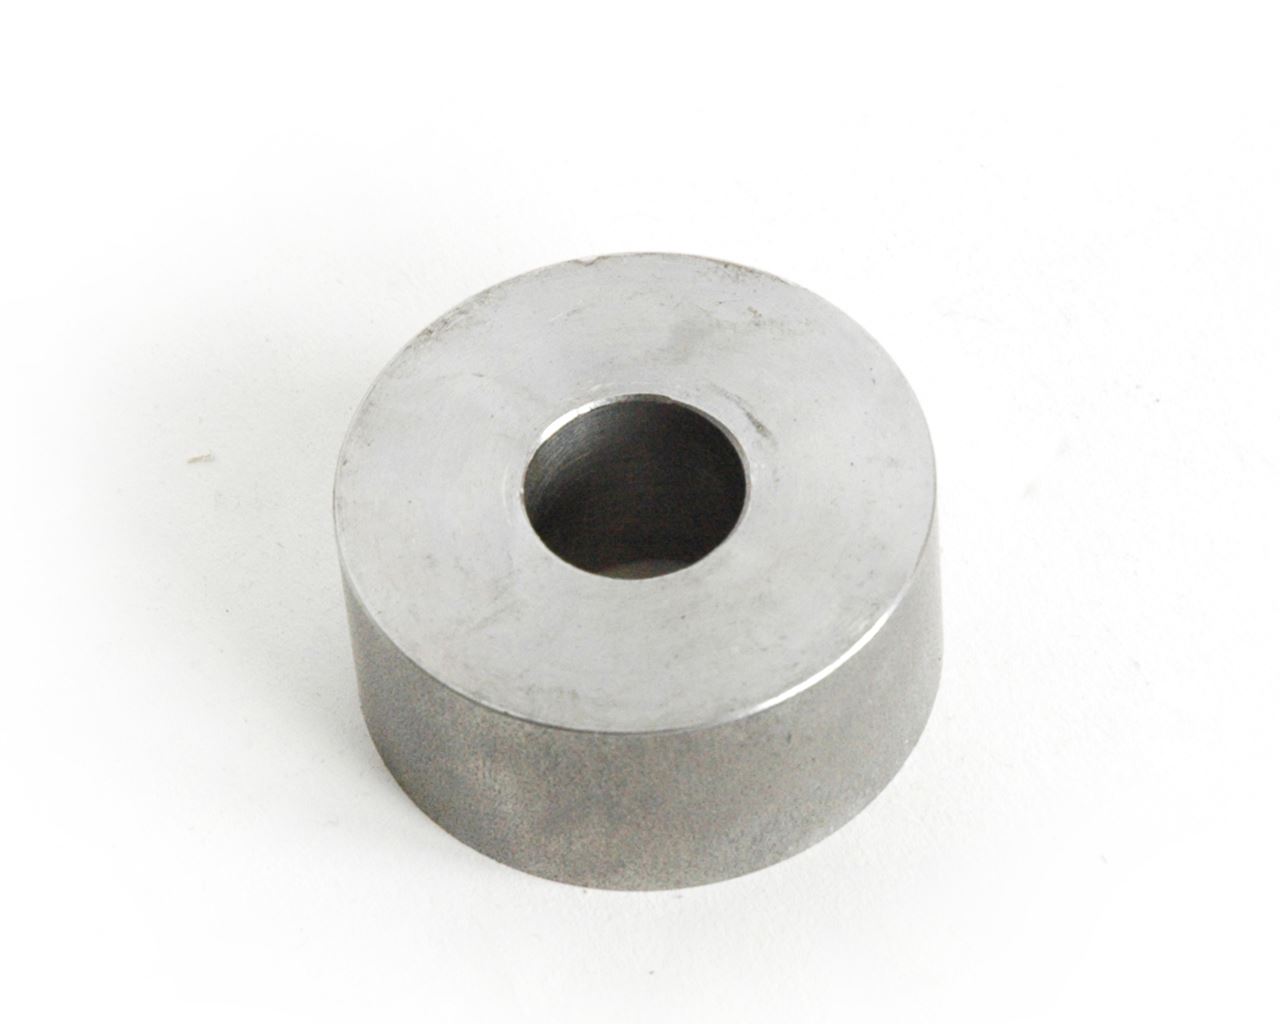 Lift table spare part - Wheel (Steel) Ø55/20-25mm